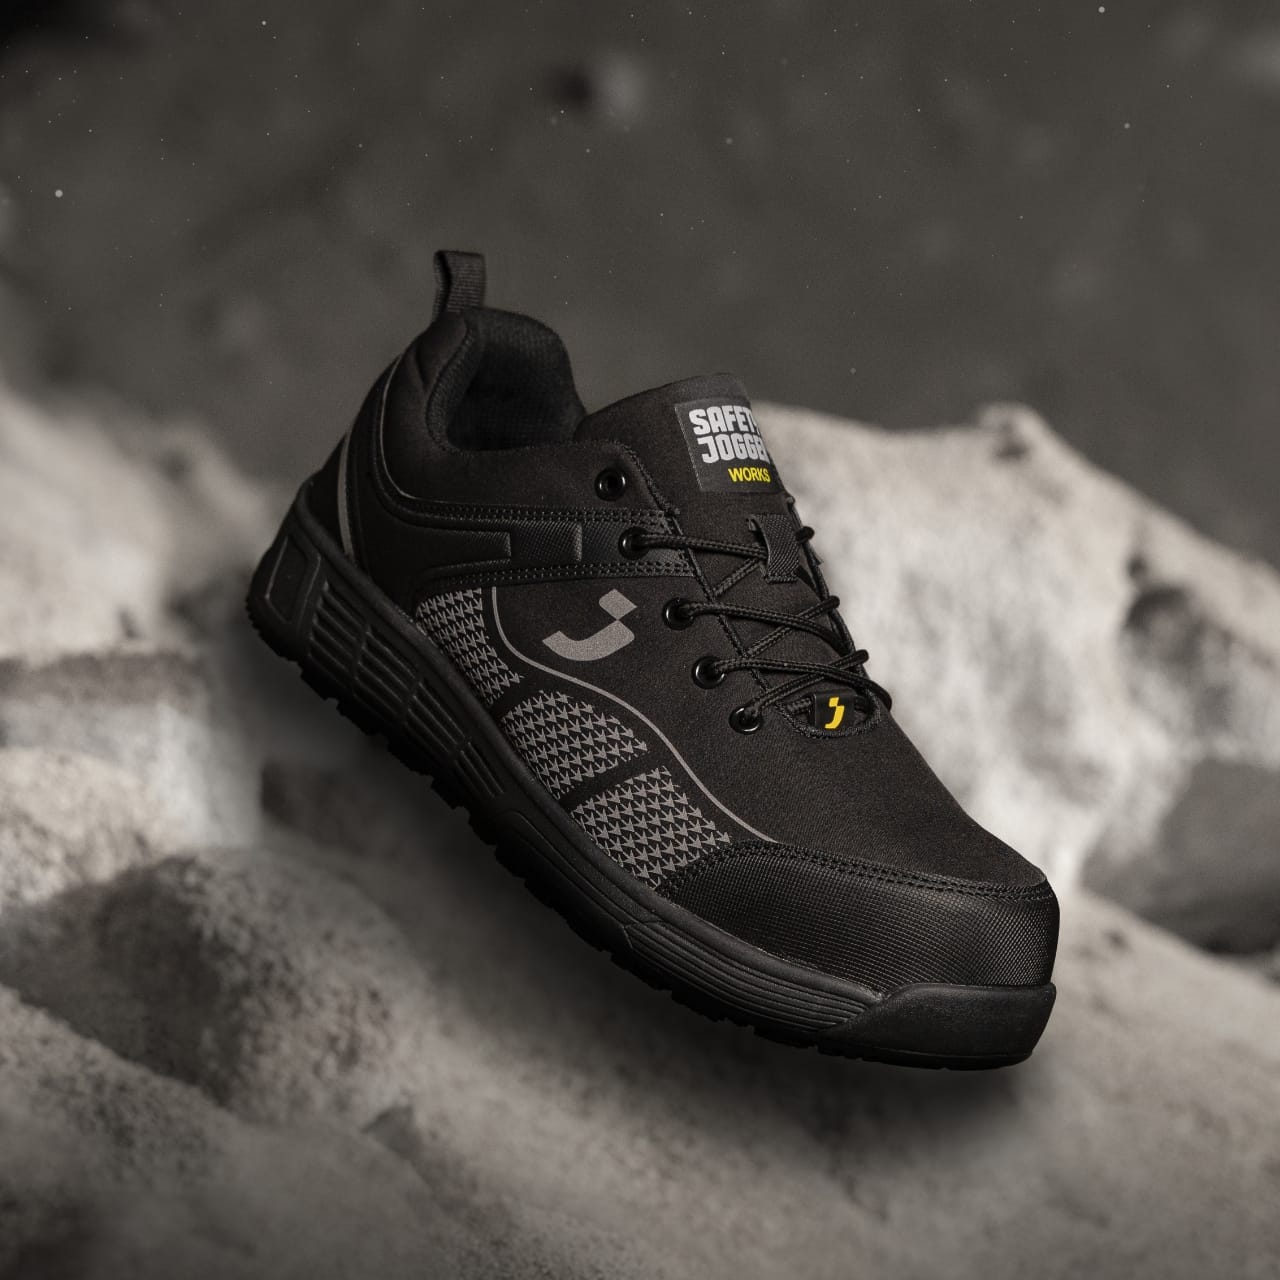 Buy Low-cut safety shoes, S1P Jogger One Fresh online